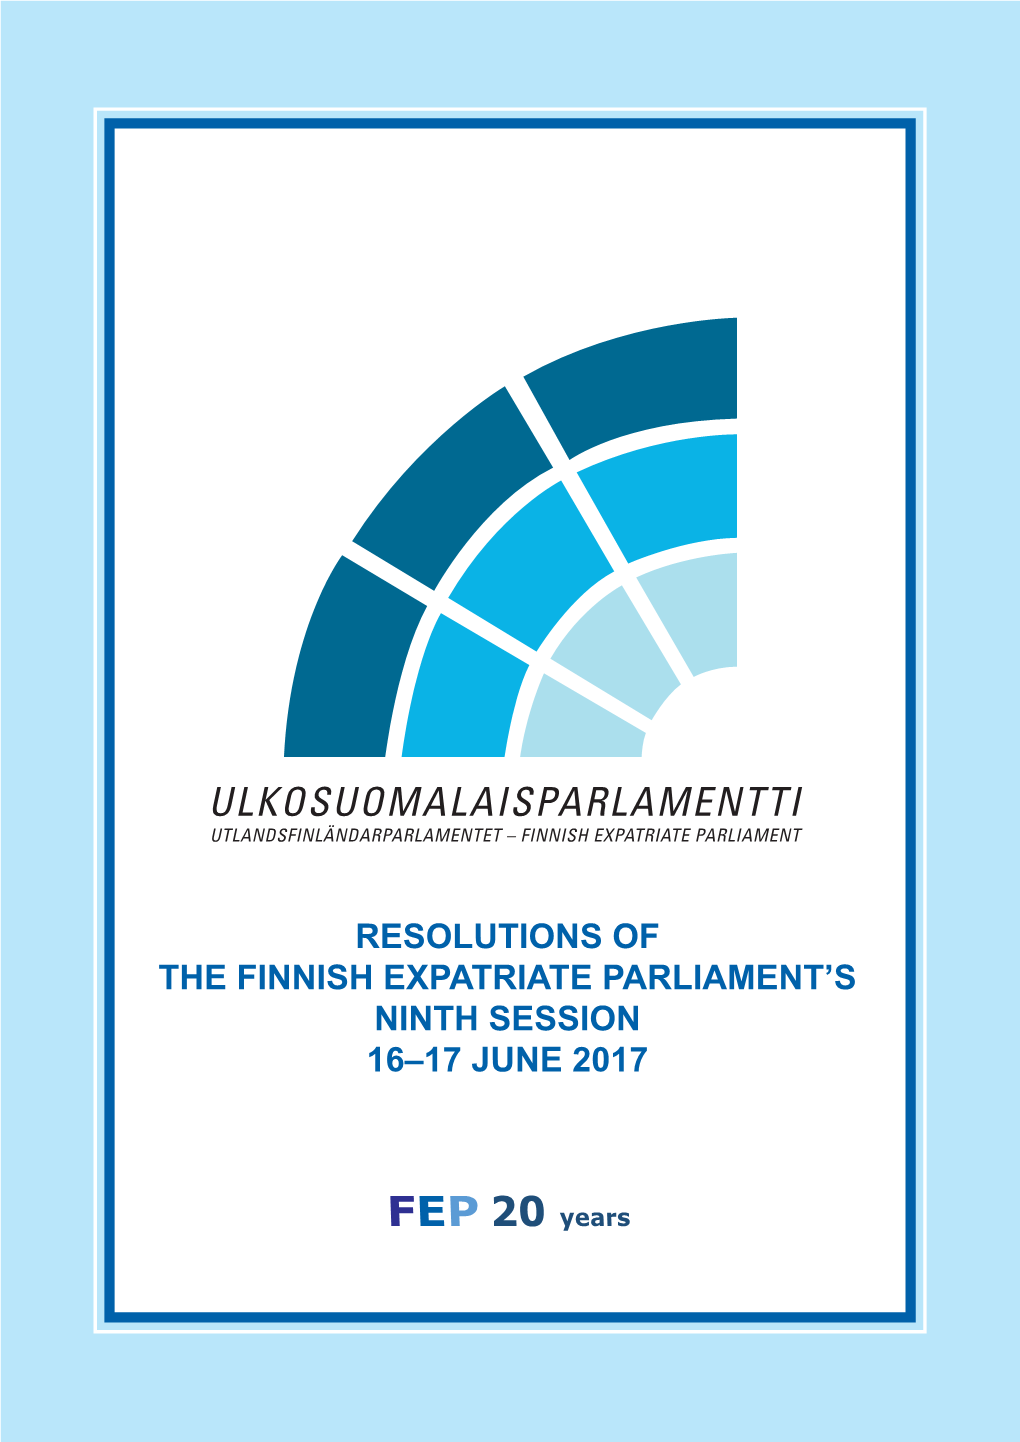 Resolutions of the Finnish Expatriate Parliament's